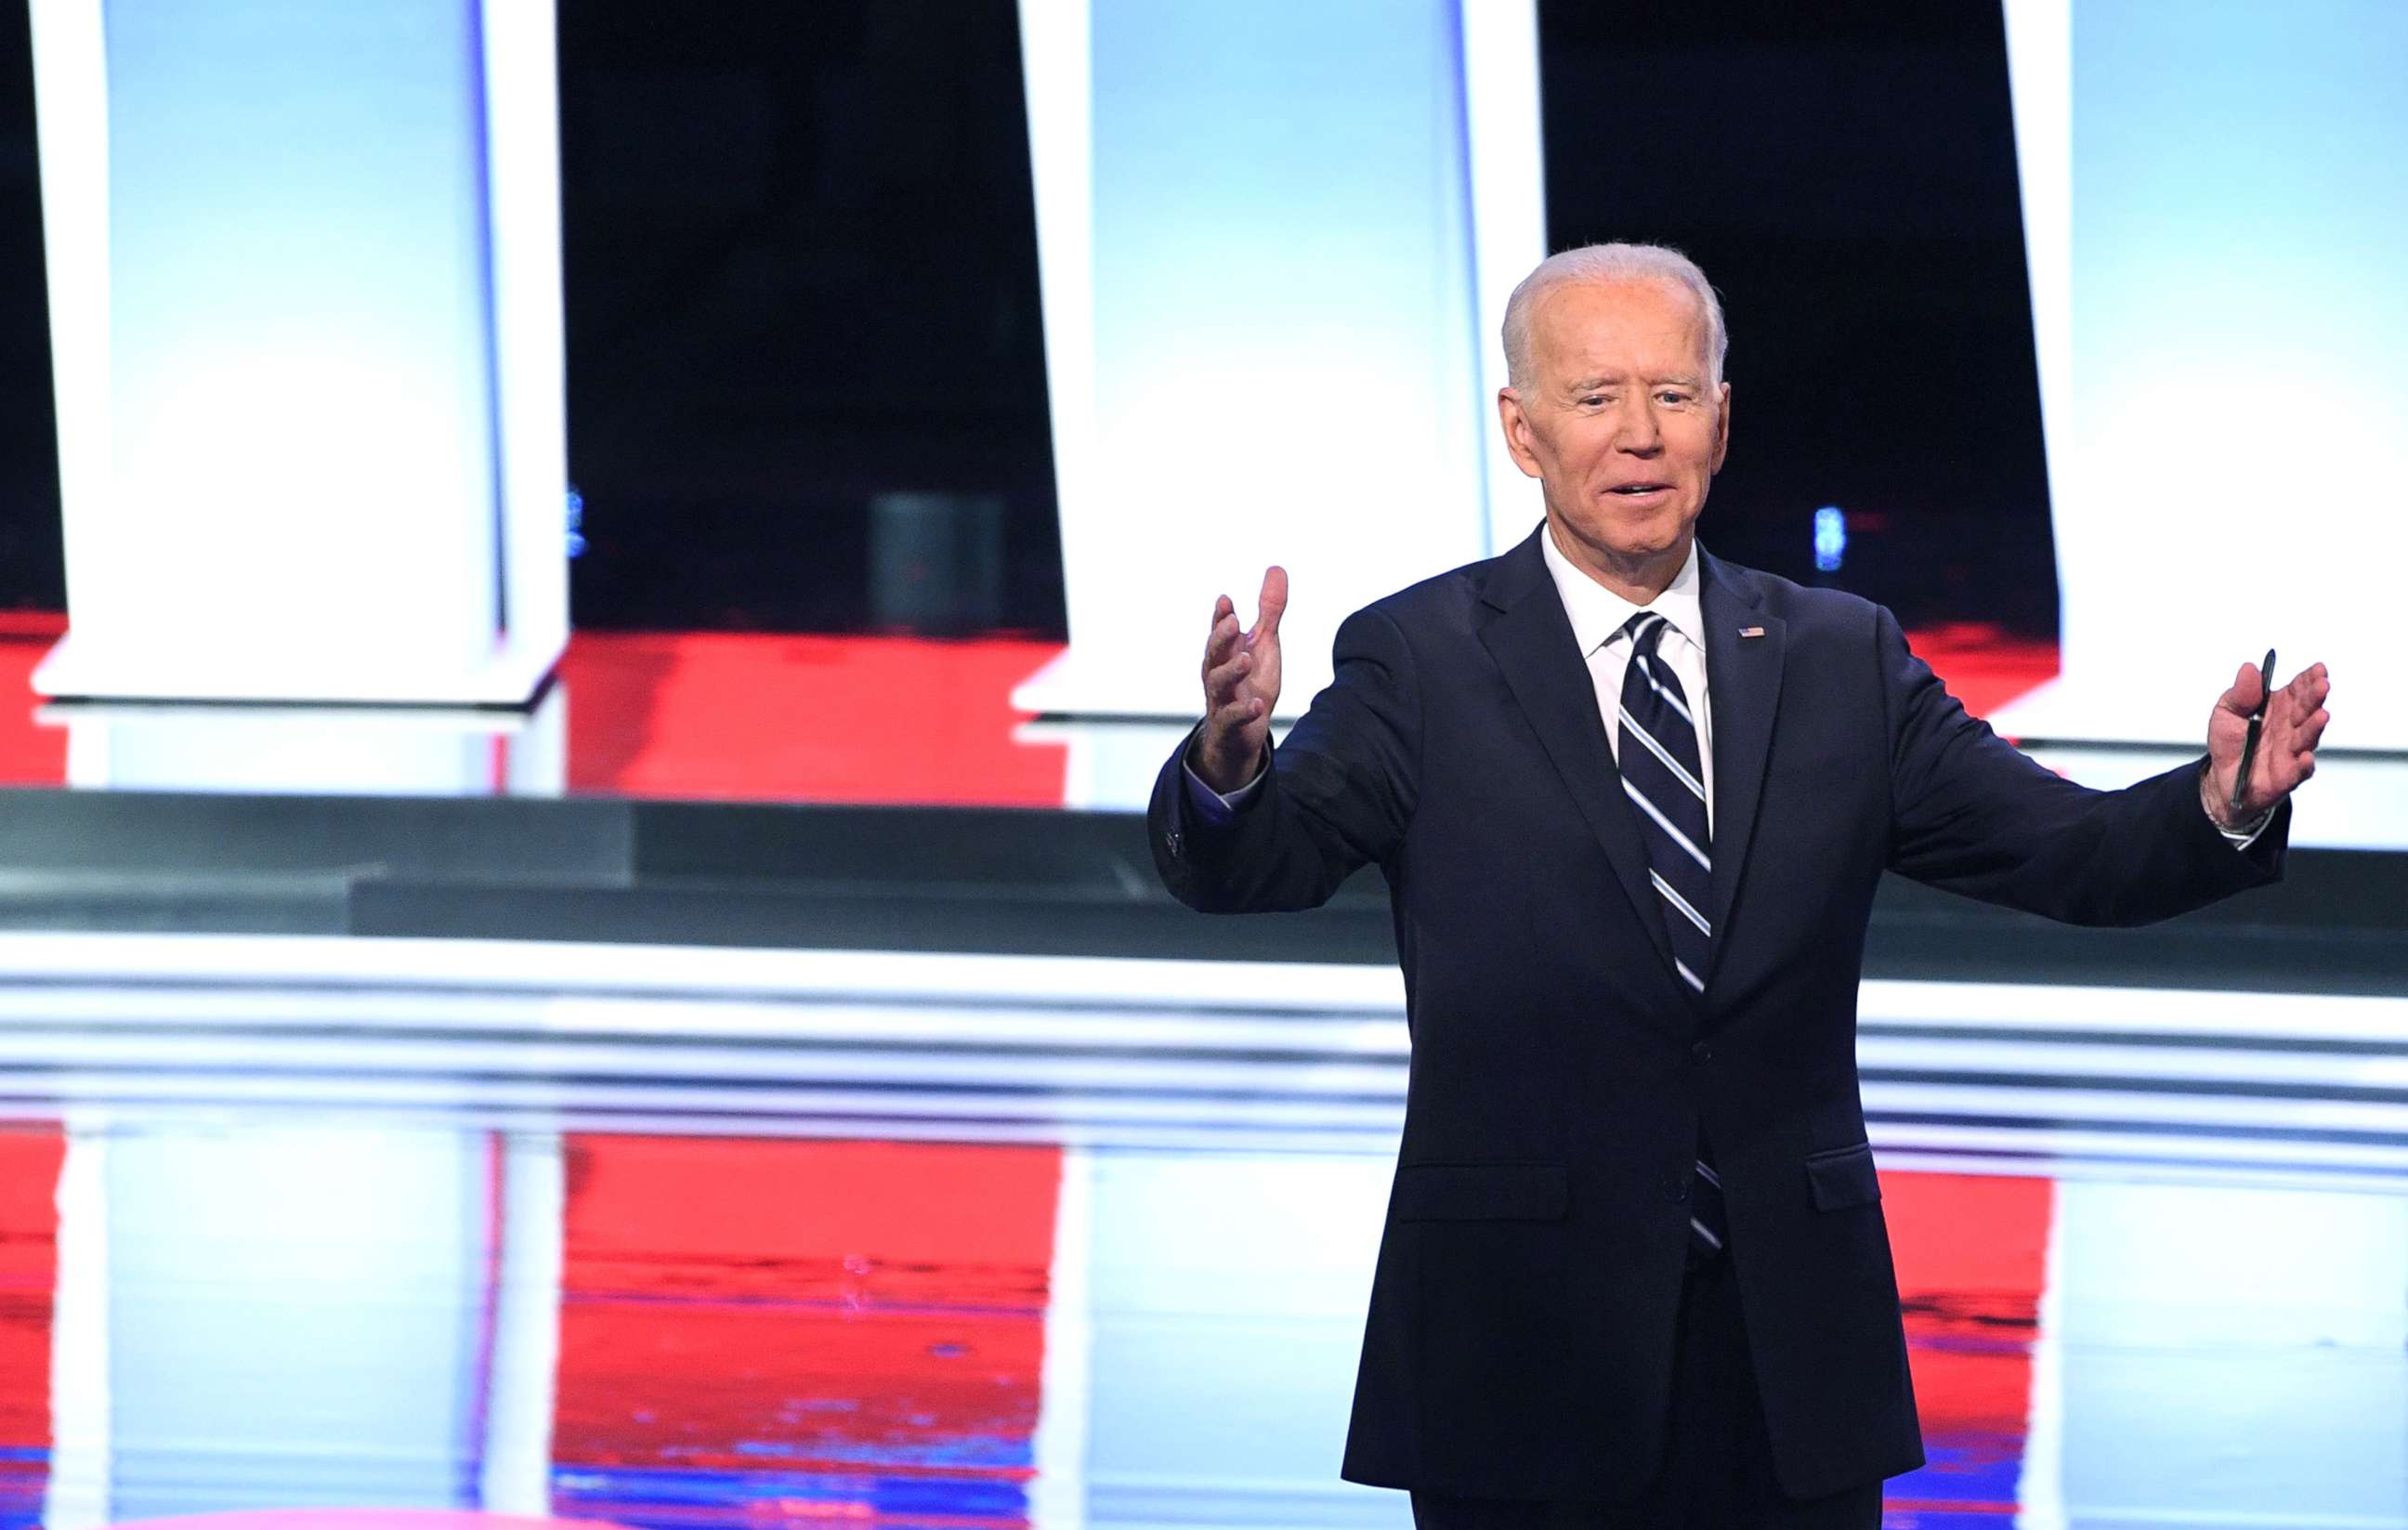 PHOTO: Democratic presidential hopeful former Vice President Joe Biden gestures after the second round of the second Democratic primary debate of the 2020 presidential campaign in Detroit, July 31, 2019.